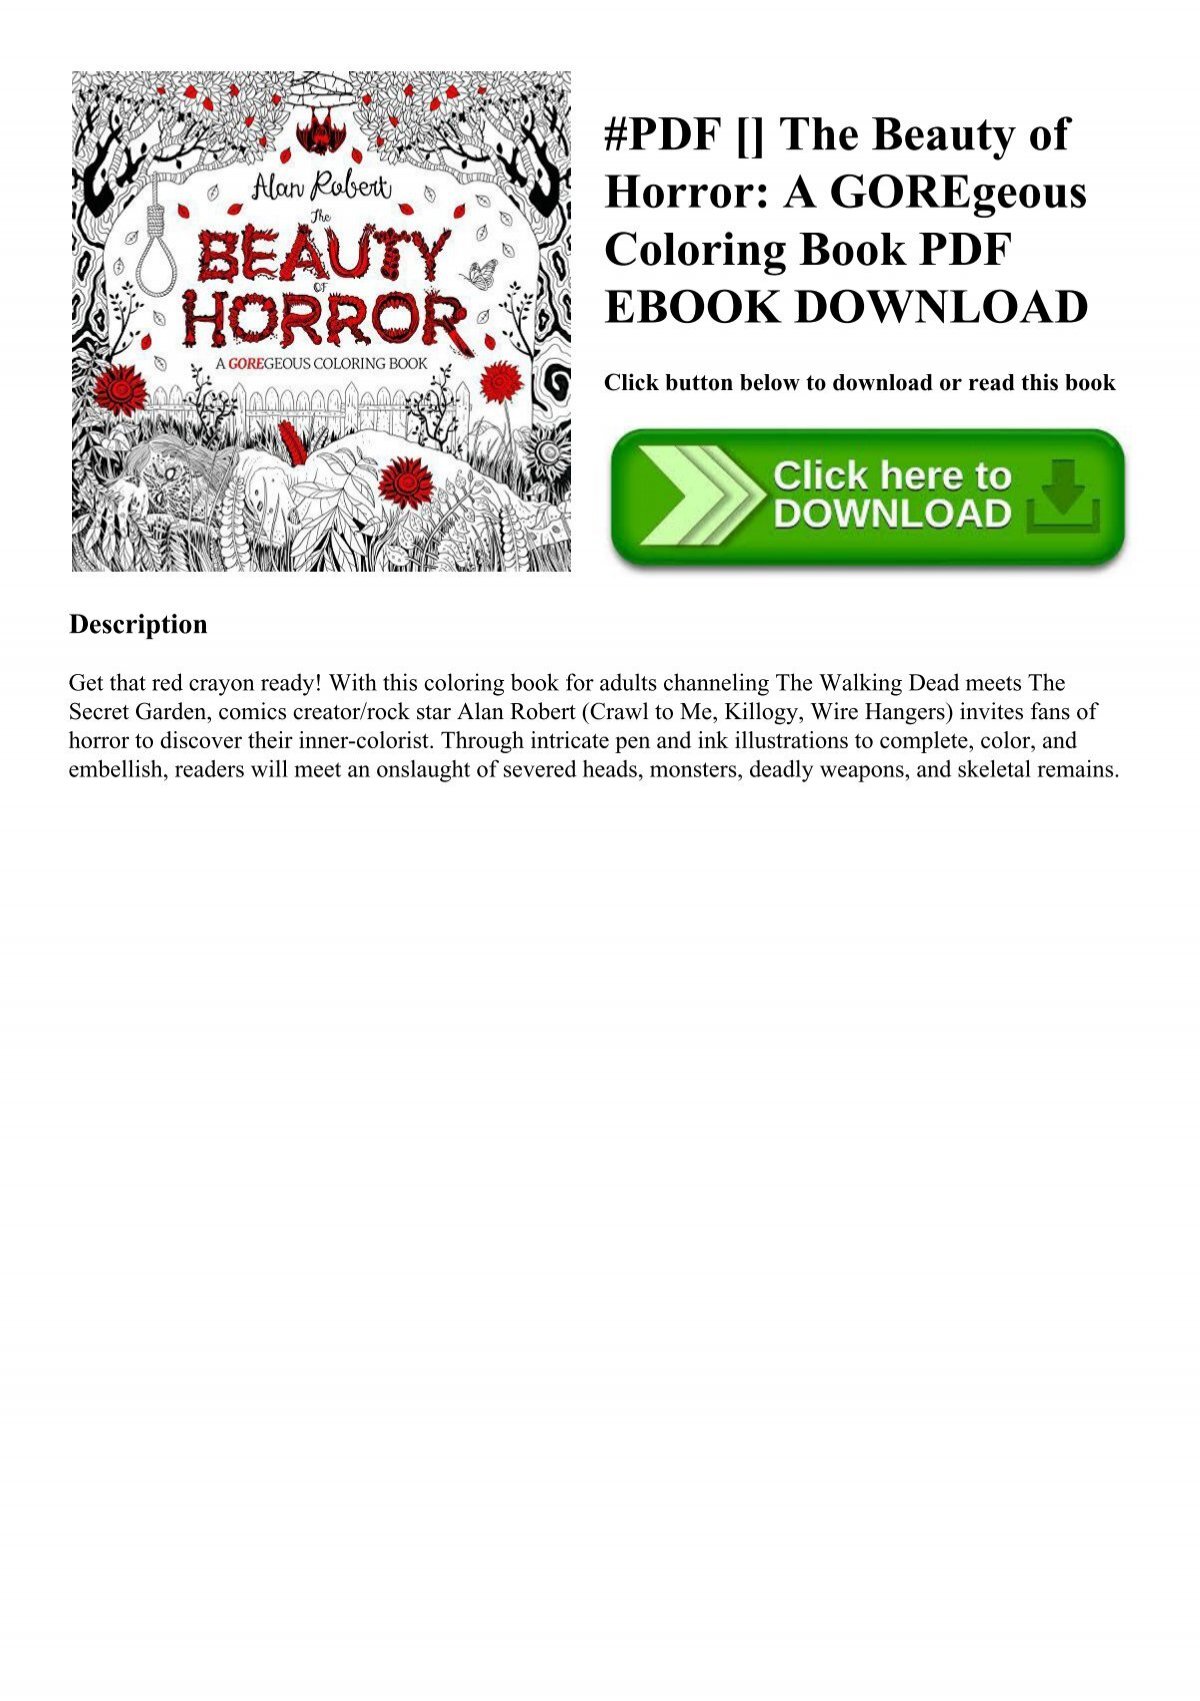 Download Pdf Download The Beauty Of Horror A Goregeous Coloring Book Pdf Ebook Download